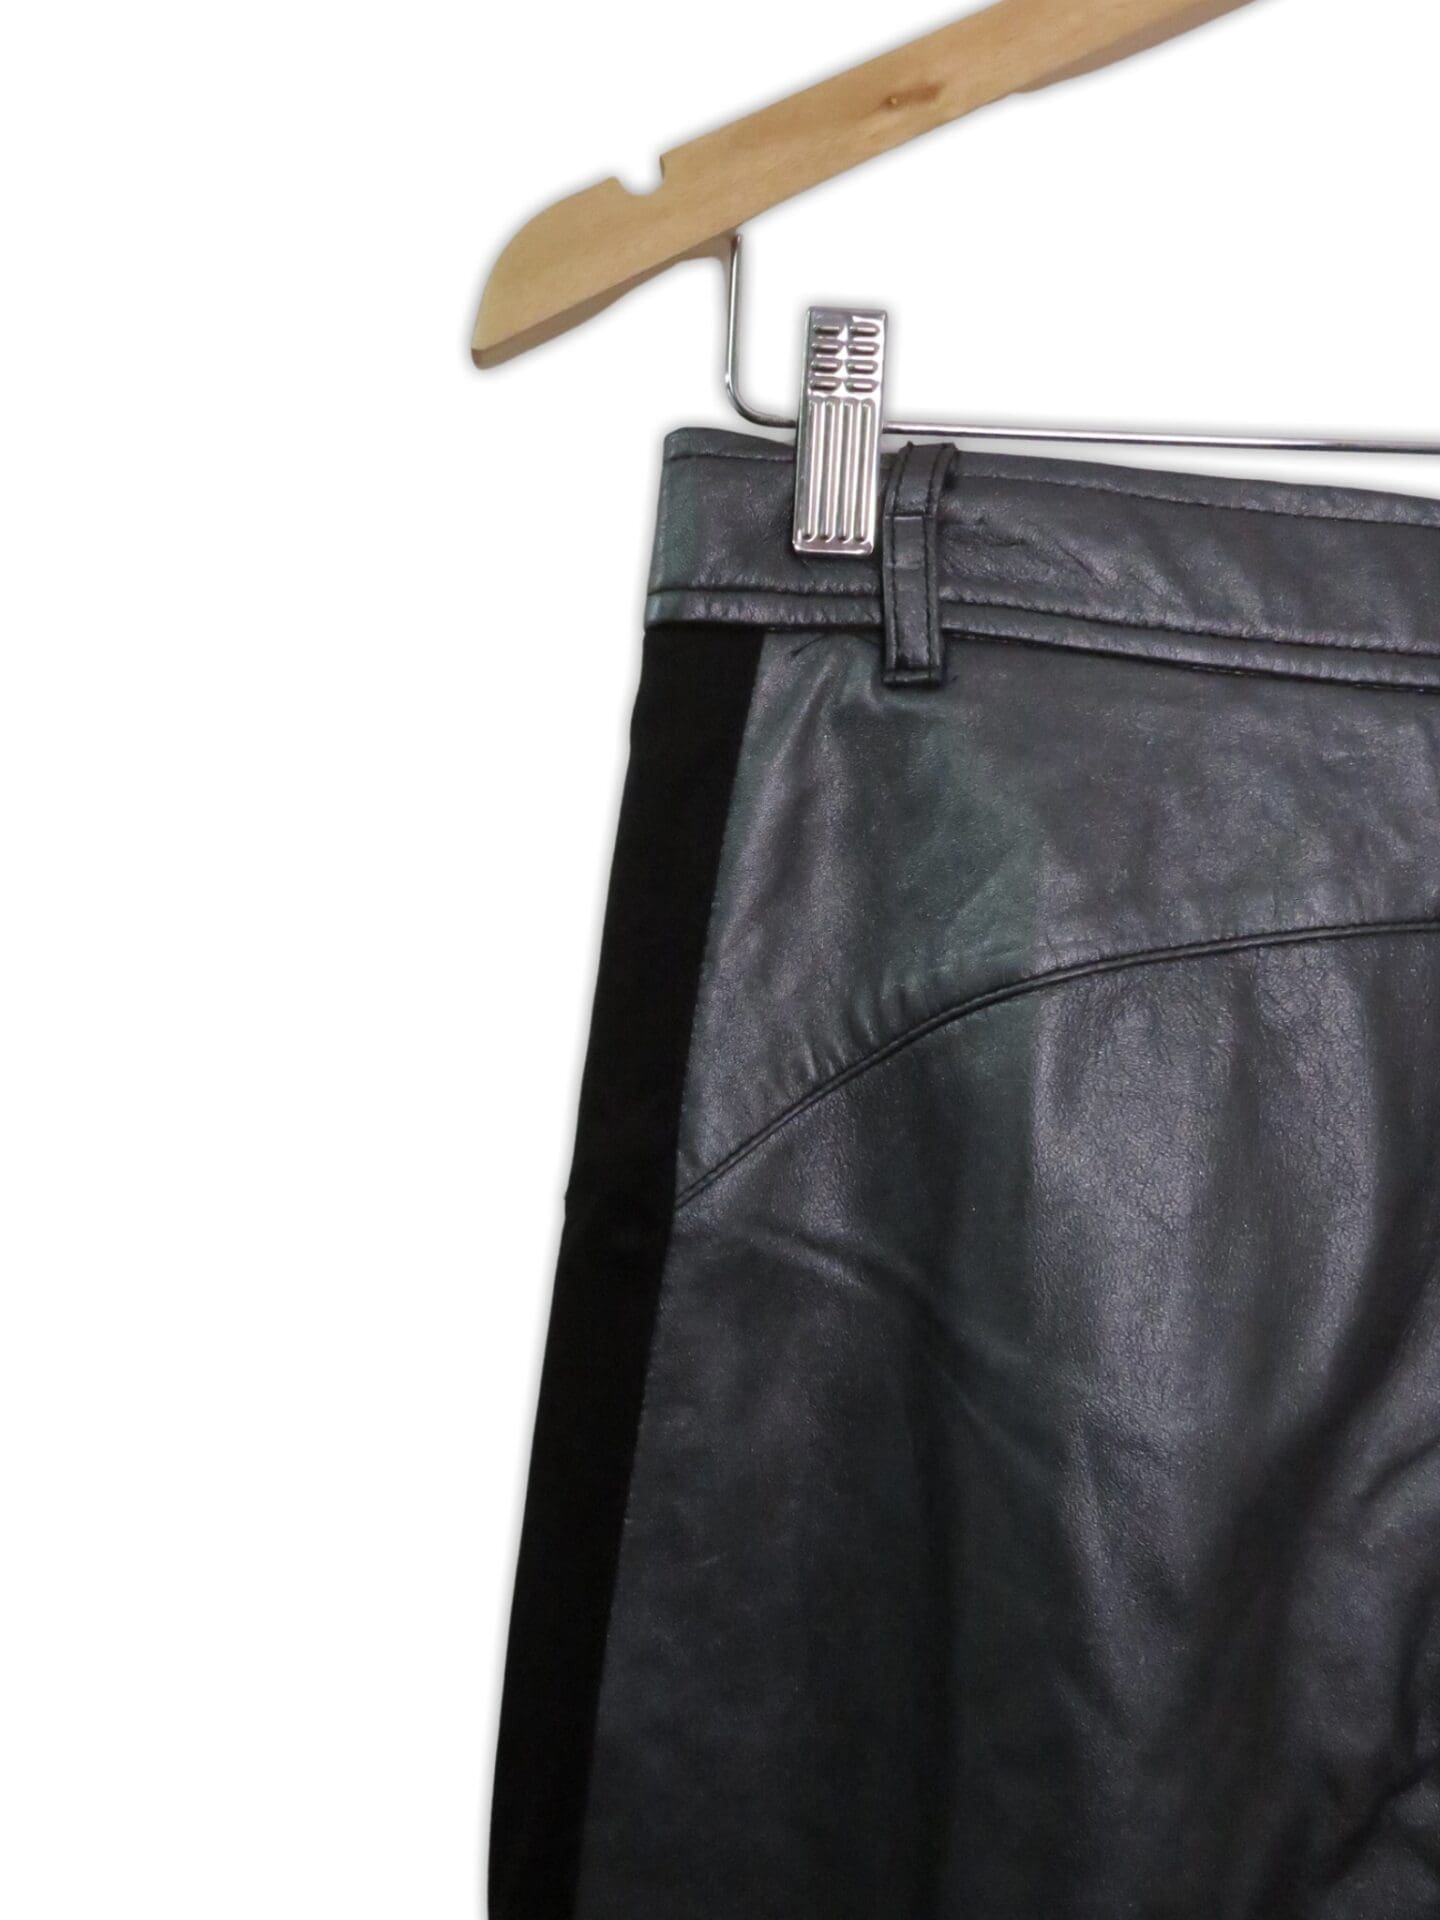 Silver soft leather straight cut pants kate sylvester